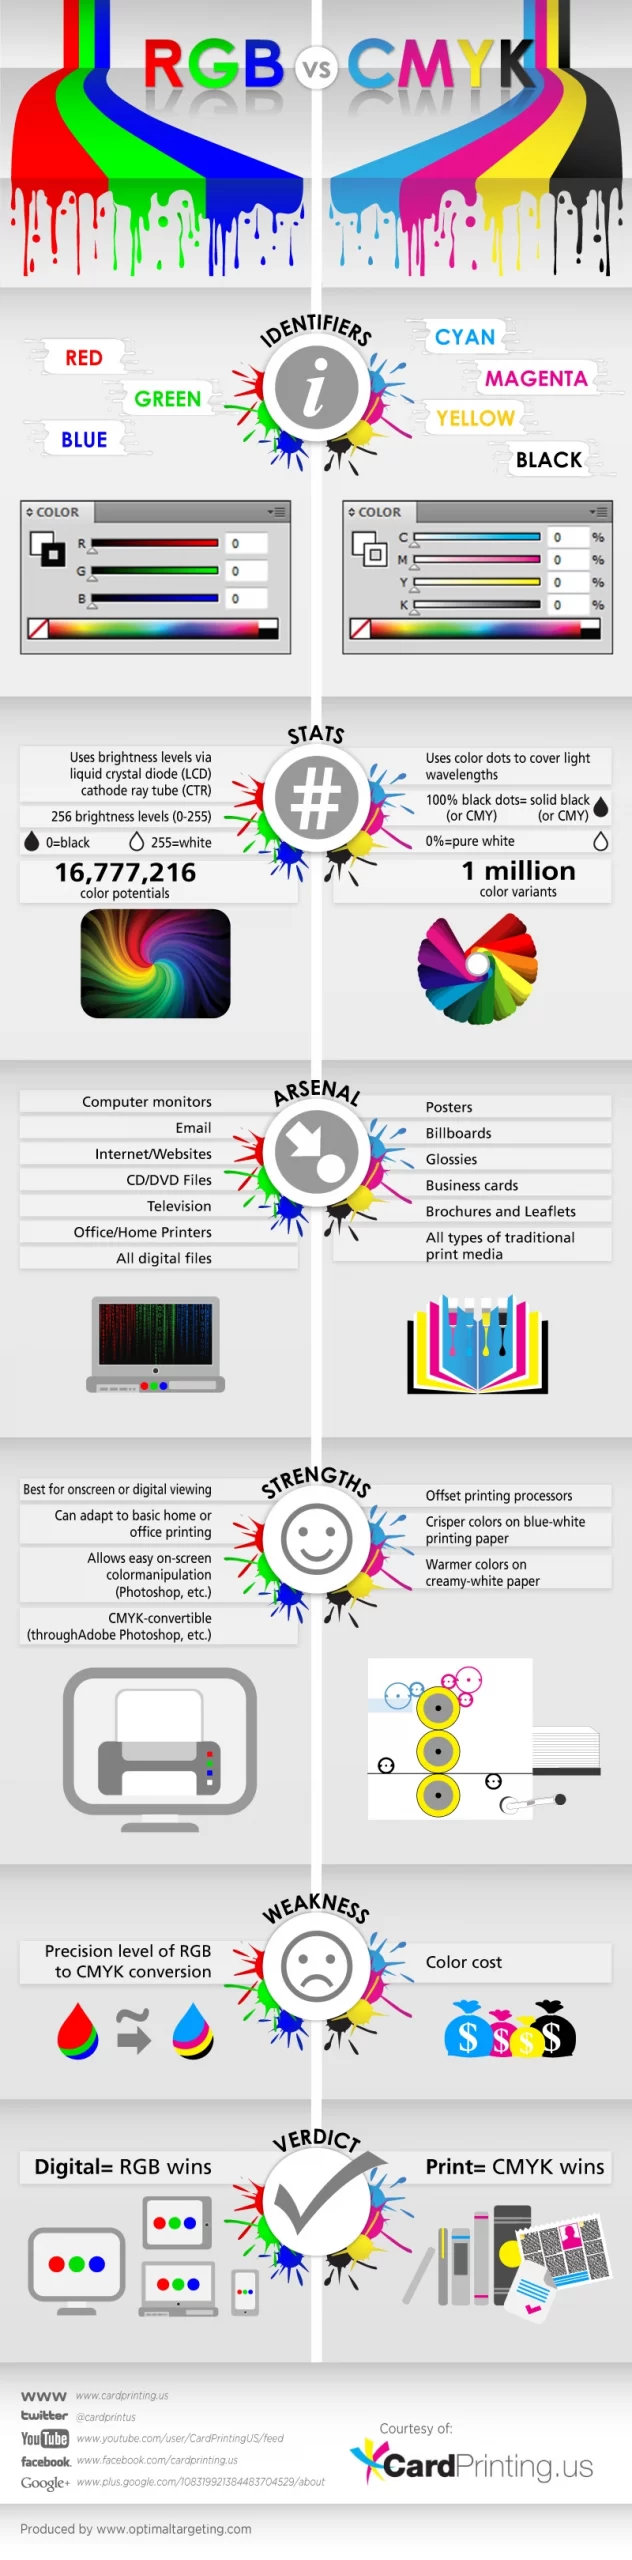 infographic defining the difference between RGB and CMYK color spaces